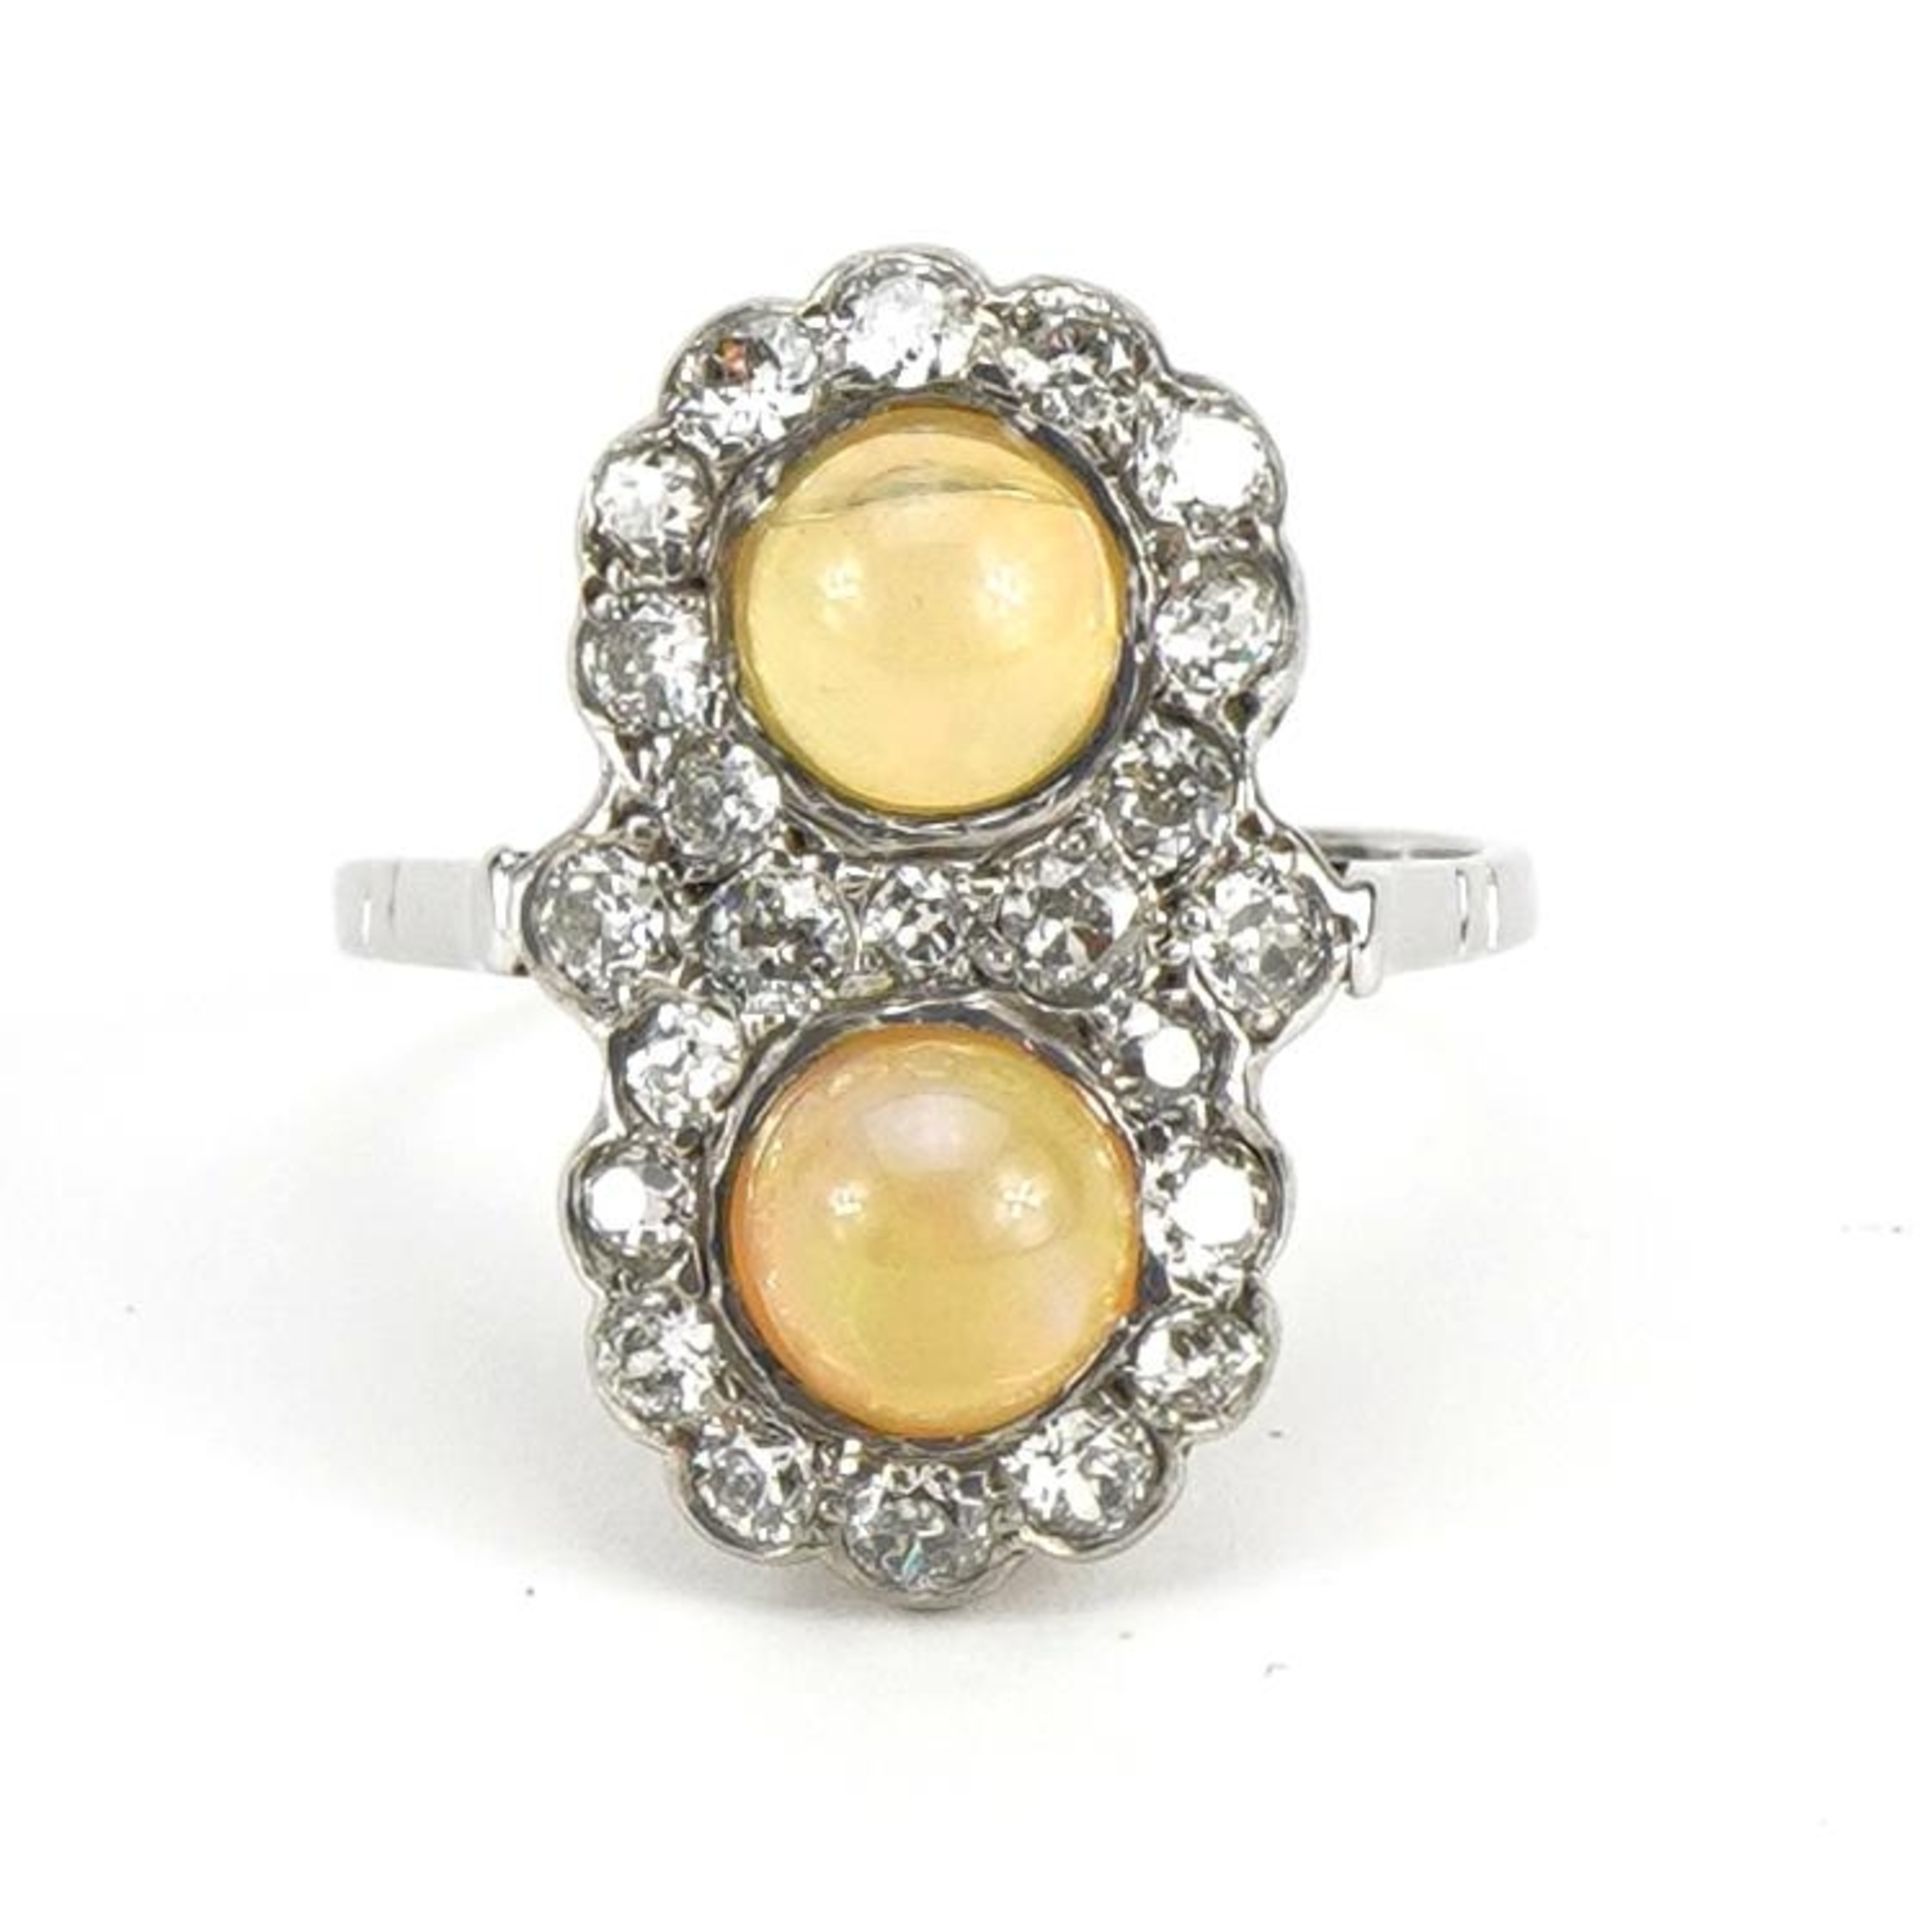 Victorian style 18ct white gold diamond cluster ring set with two cabochon opals, total opal